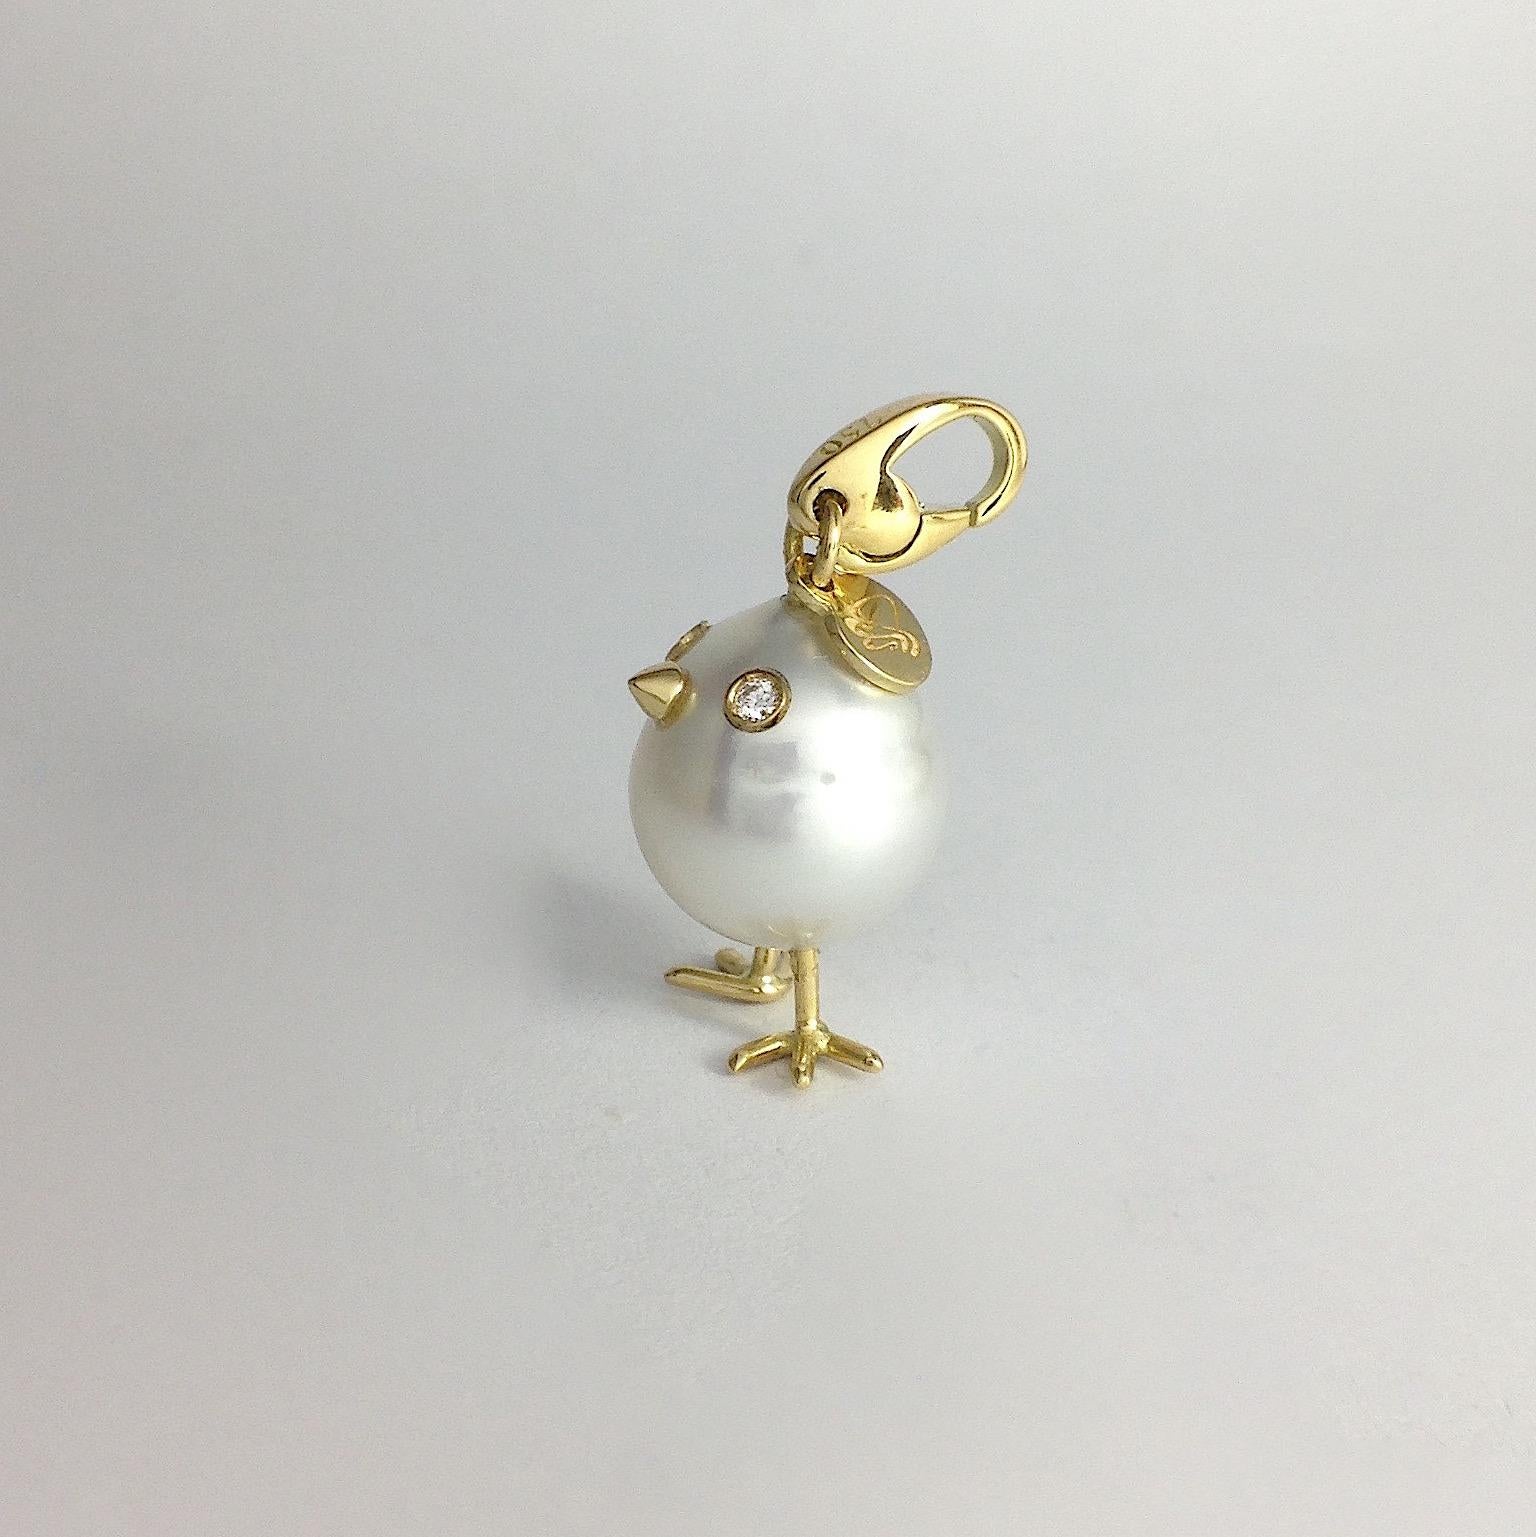 A spherical rare Australian pearl has been carefully crafted to make a chick. He has his two legs, two eyes encrusted with two white diamonds and his golden beak. The ring for the necklace is a carabiner so it can be worn also as a beautiful charm